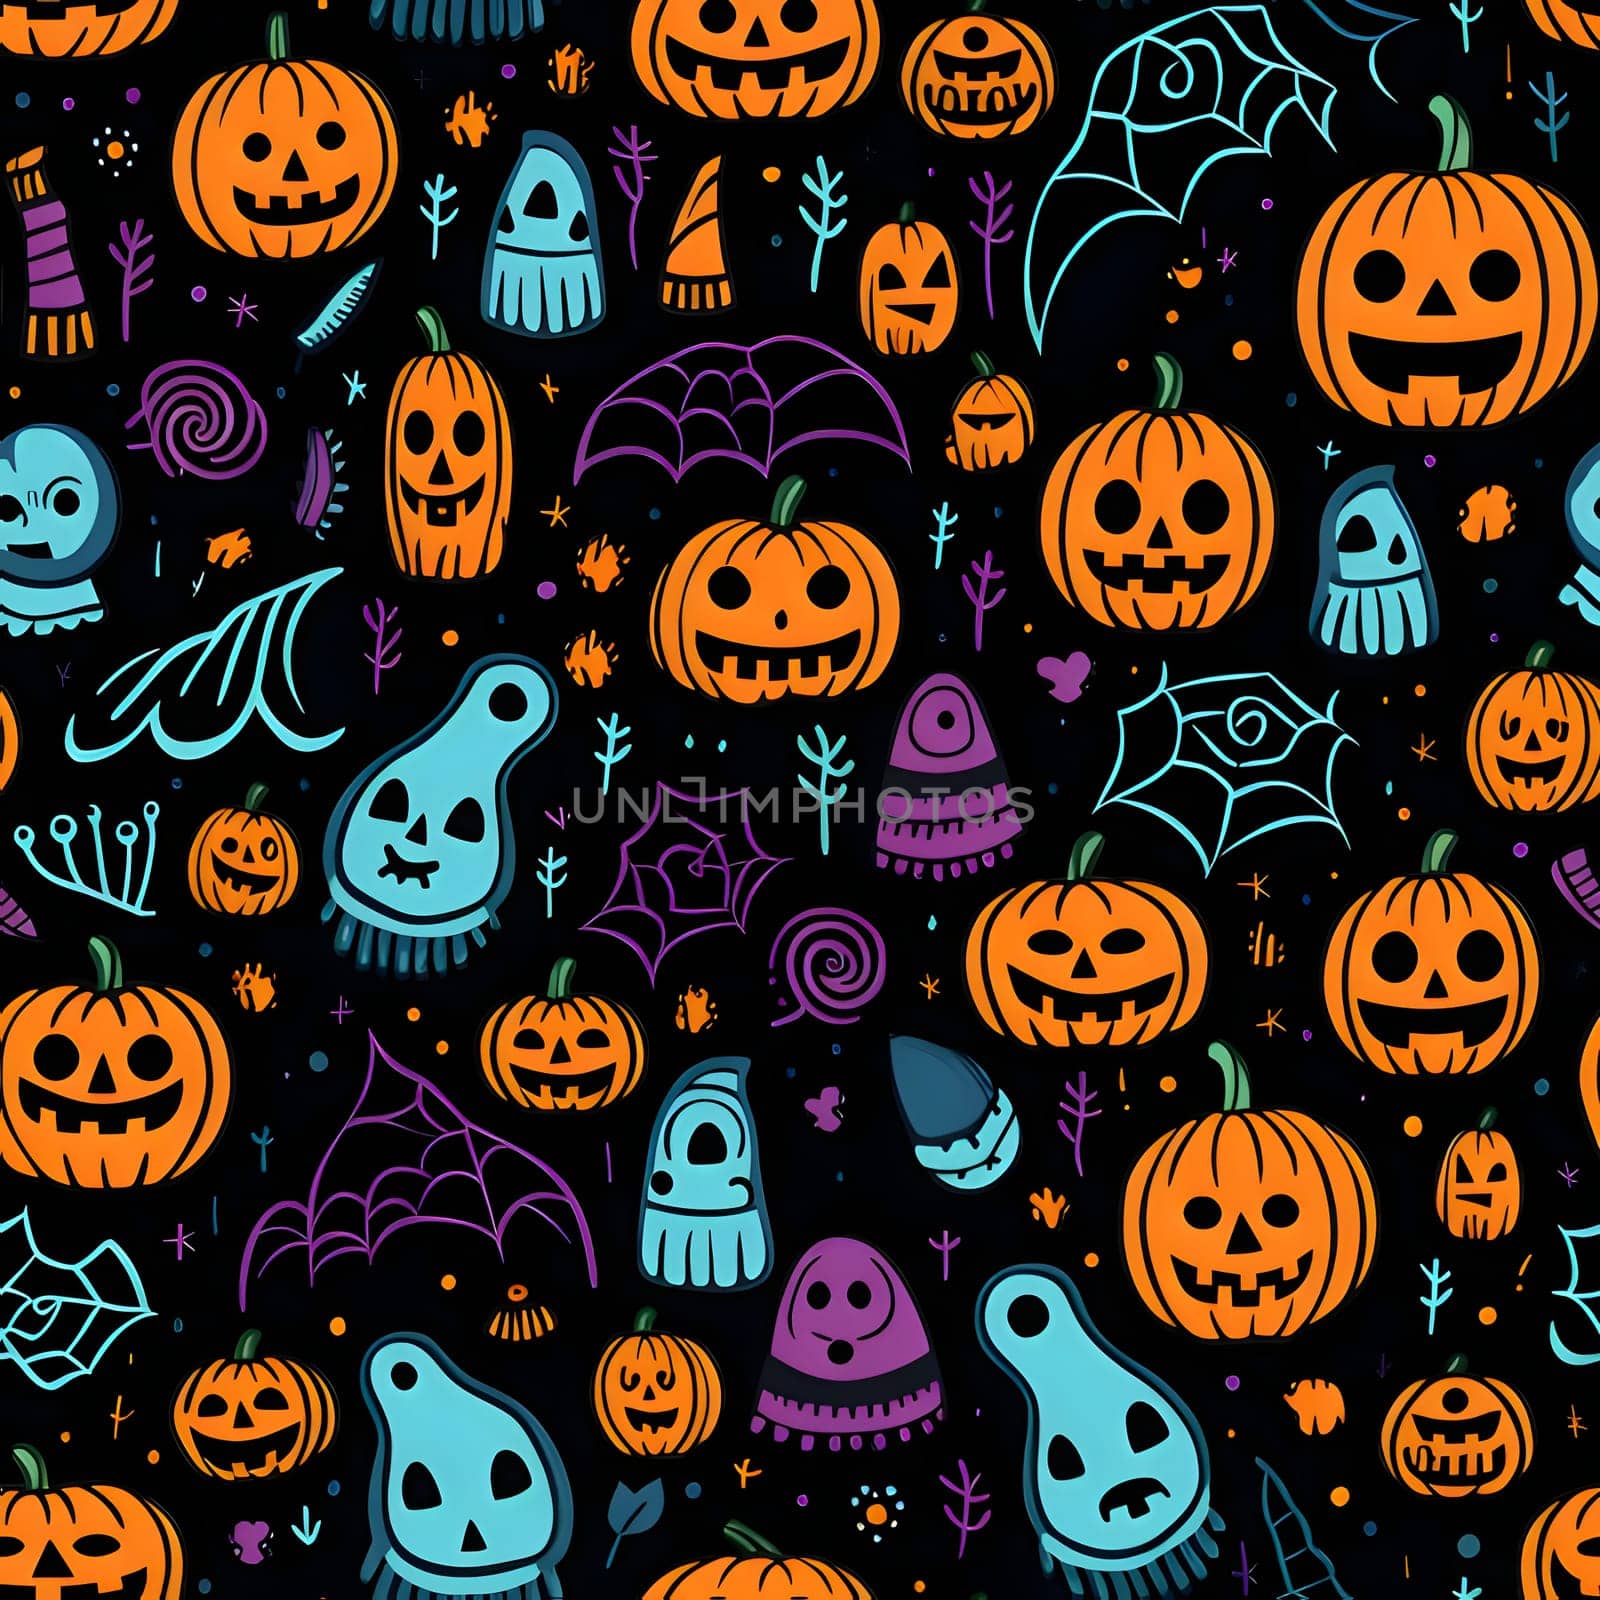 Patterns and banners backgrounds: Halloween seamless pattern with pumpkins, ghosts, spiders, bats and other elements.